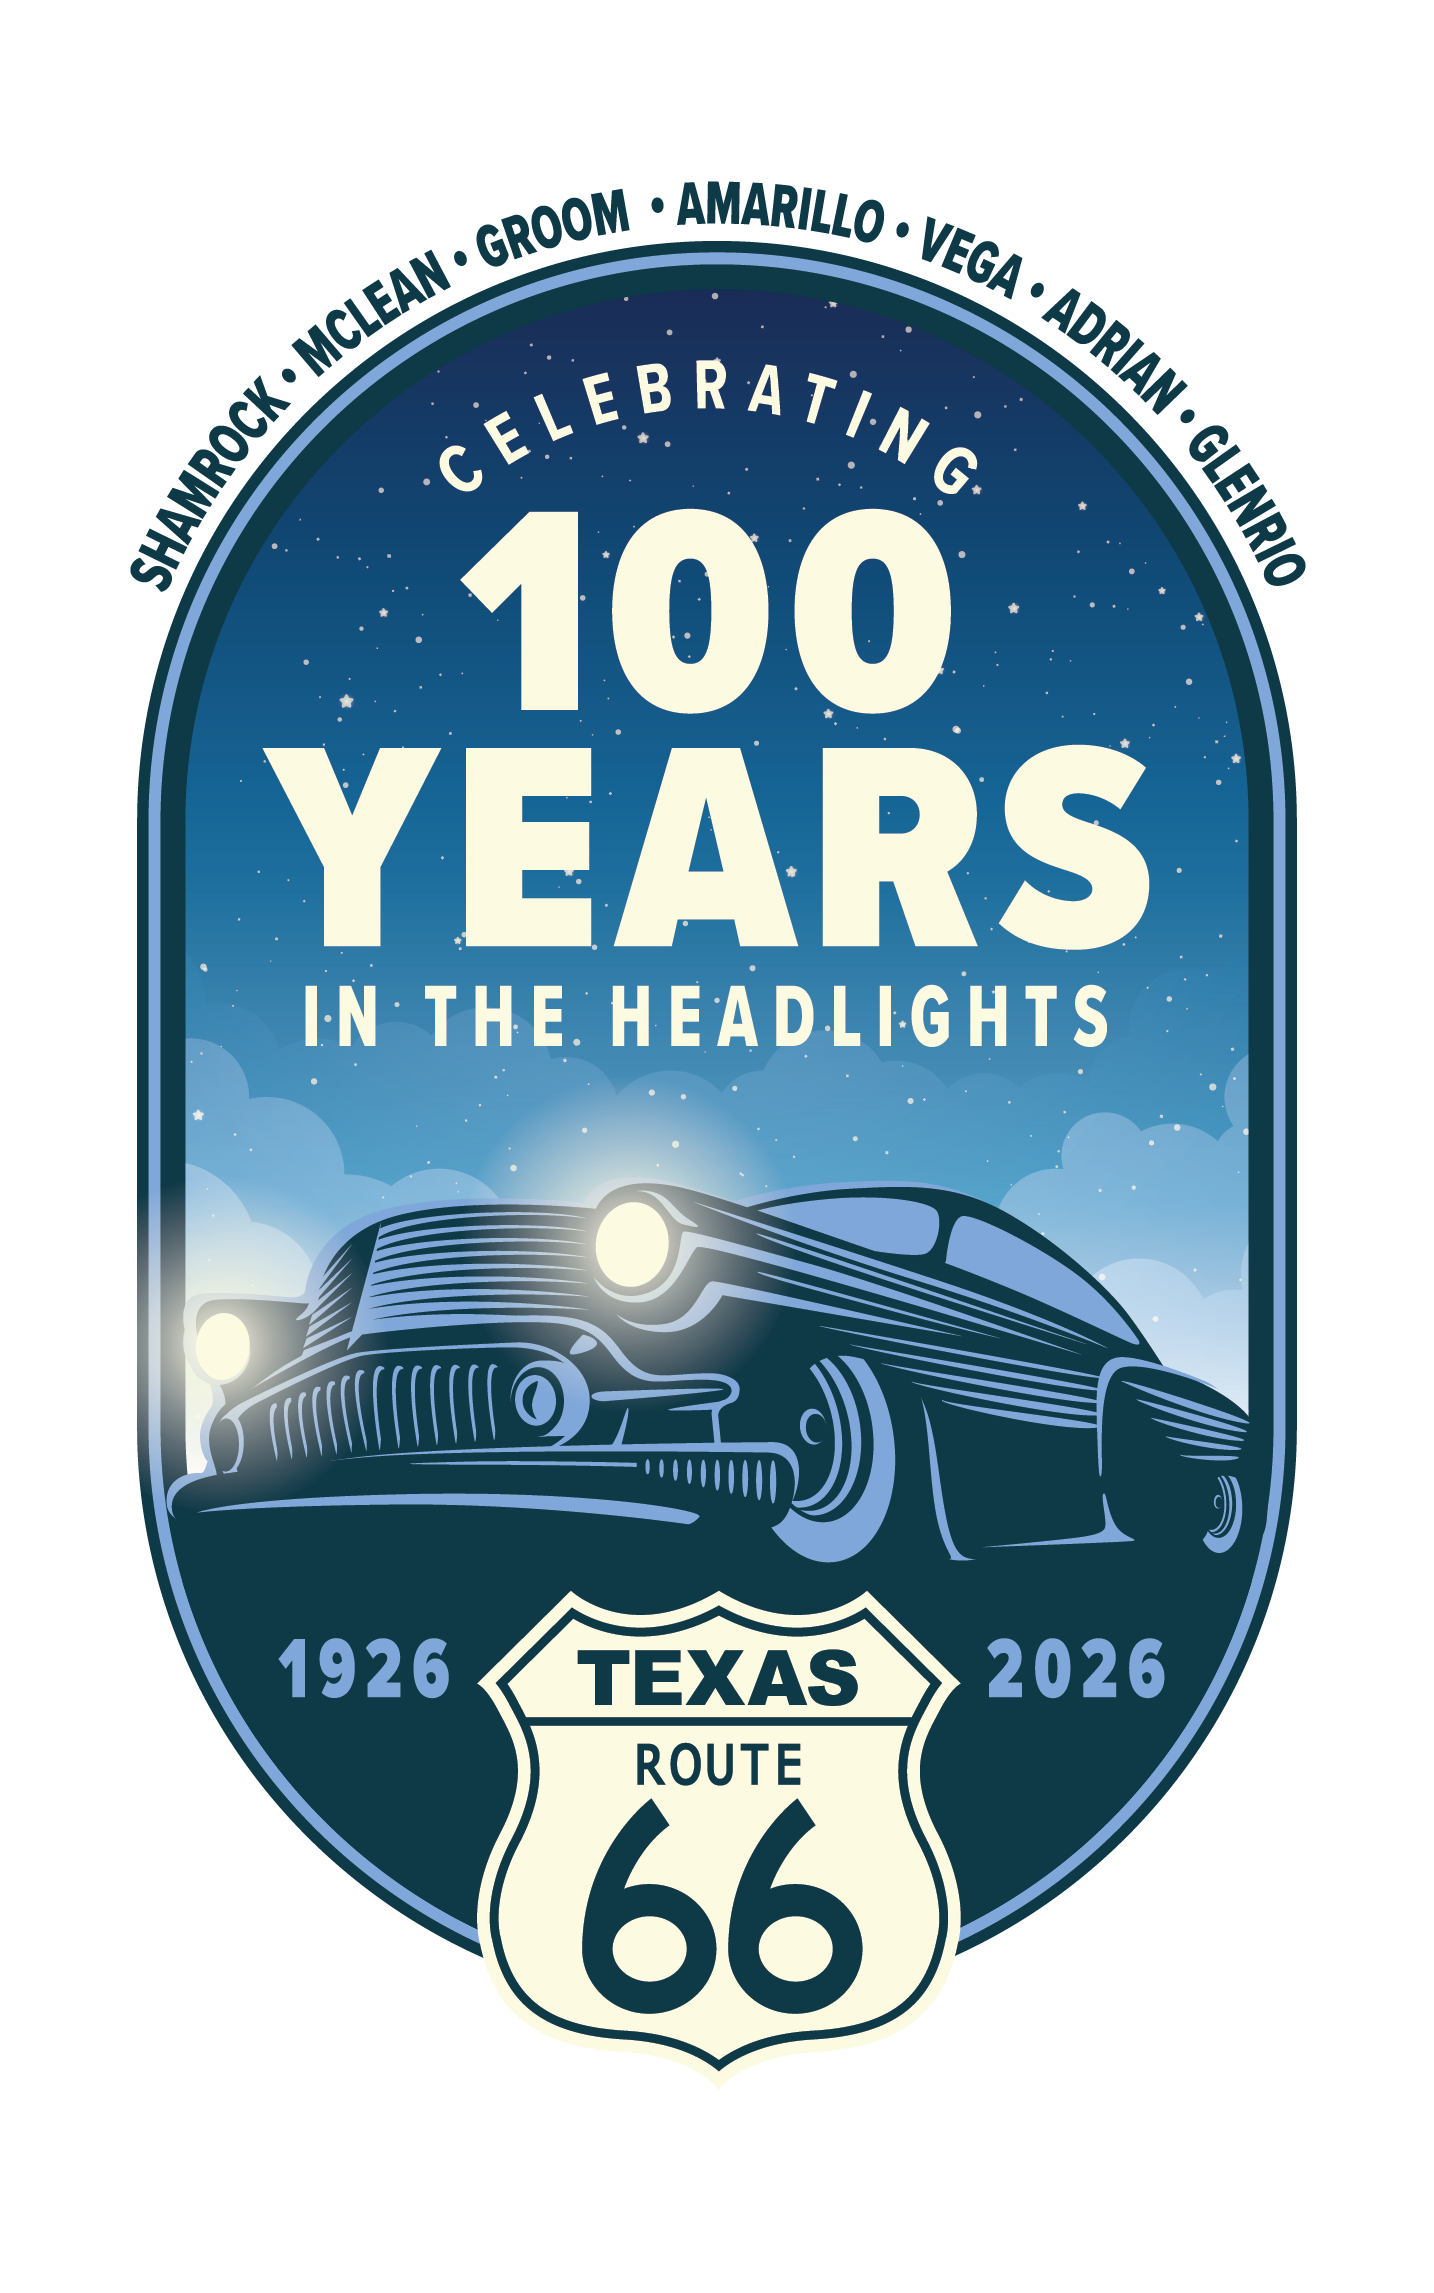 Route 66 Centennial logo reads “Celebrating 100 Years in the Headlights“